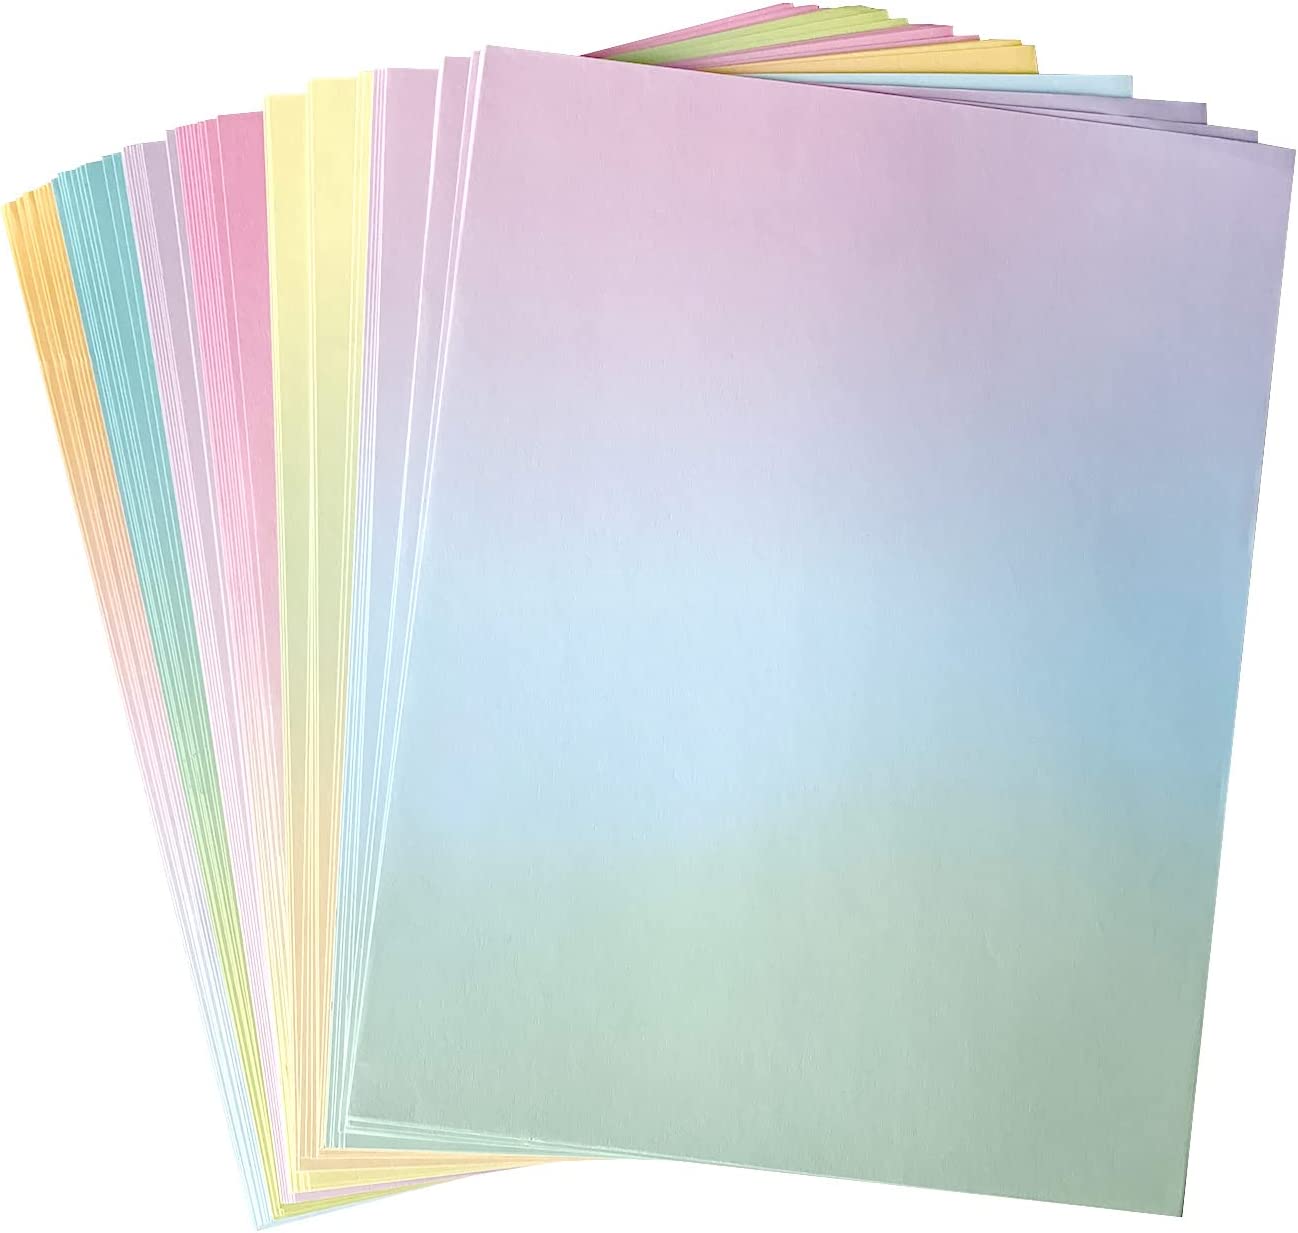 Gradient Writing Papers - shopartivo